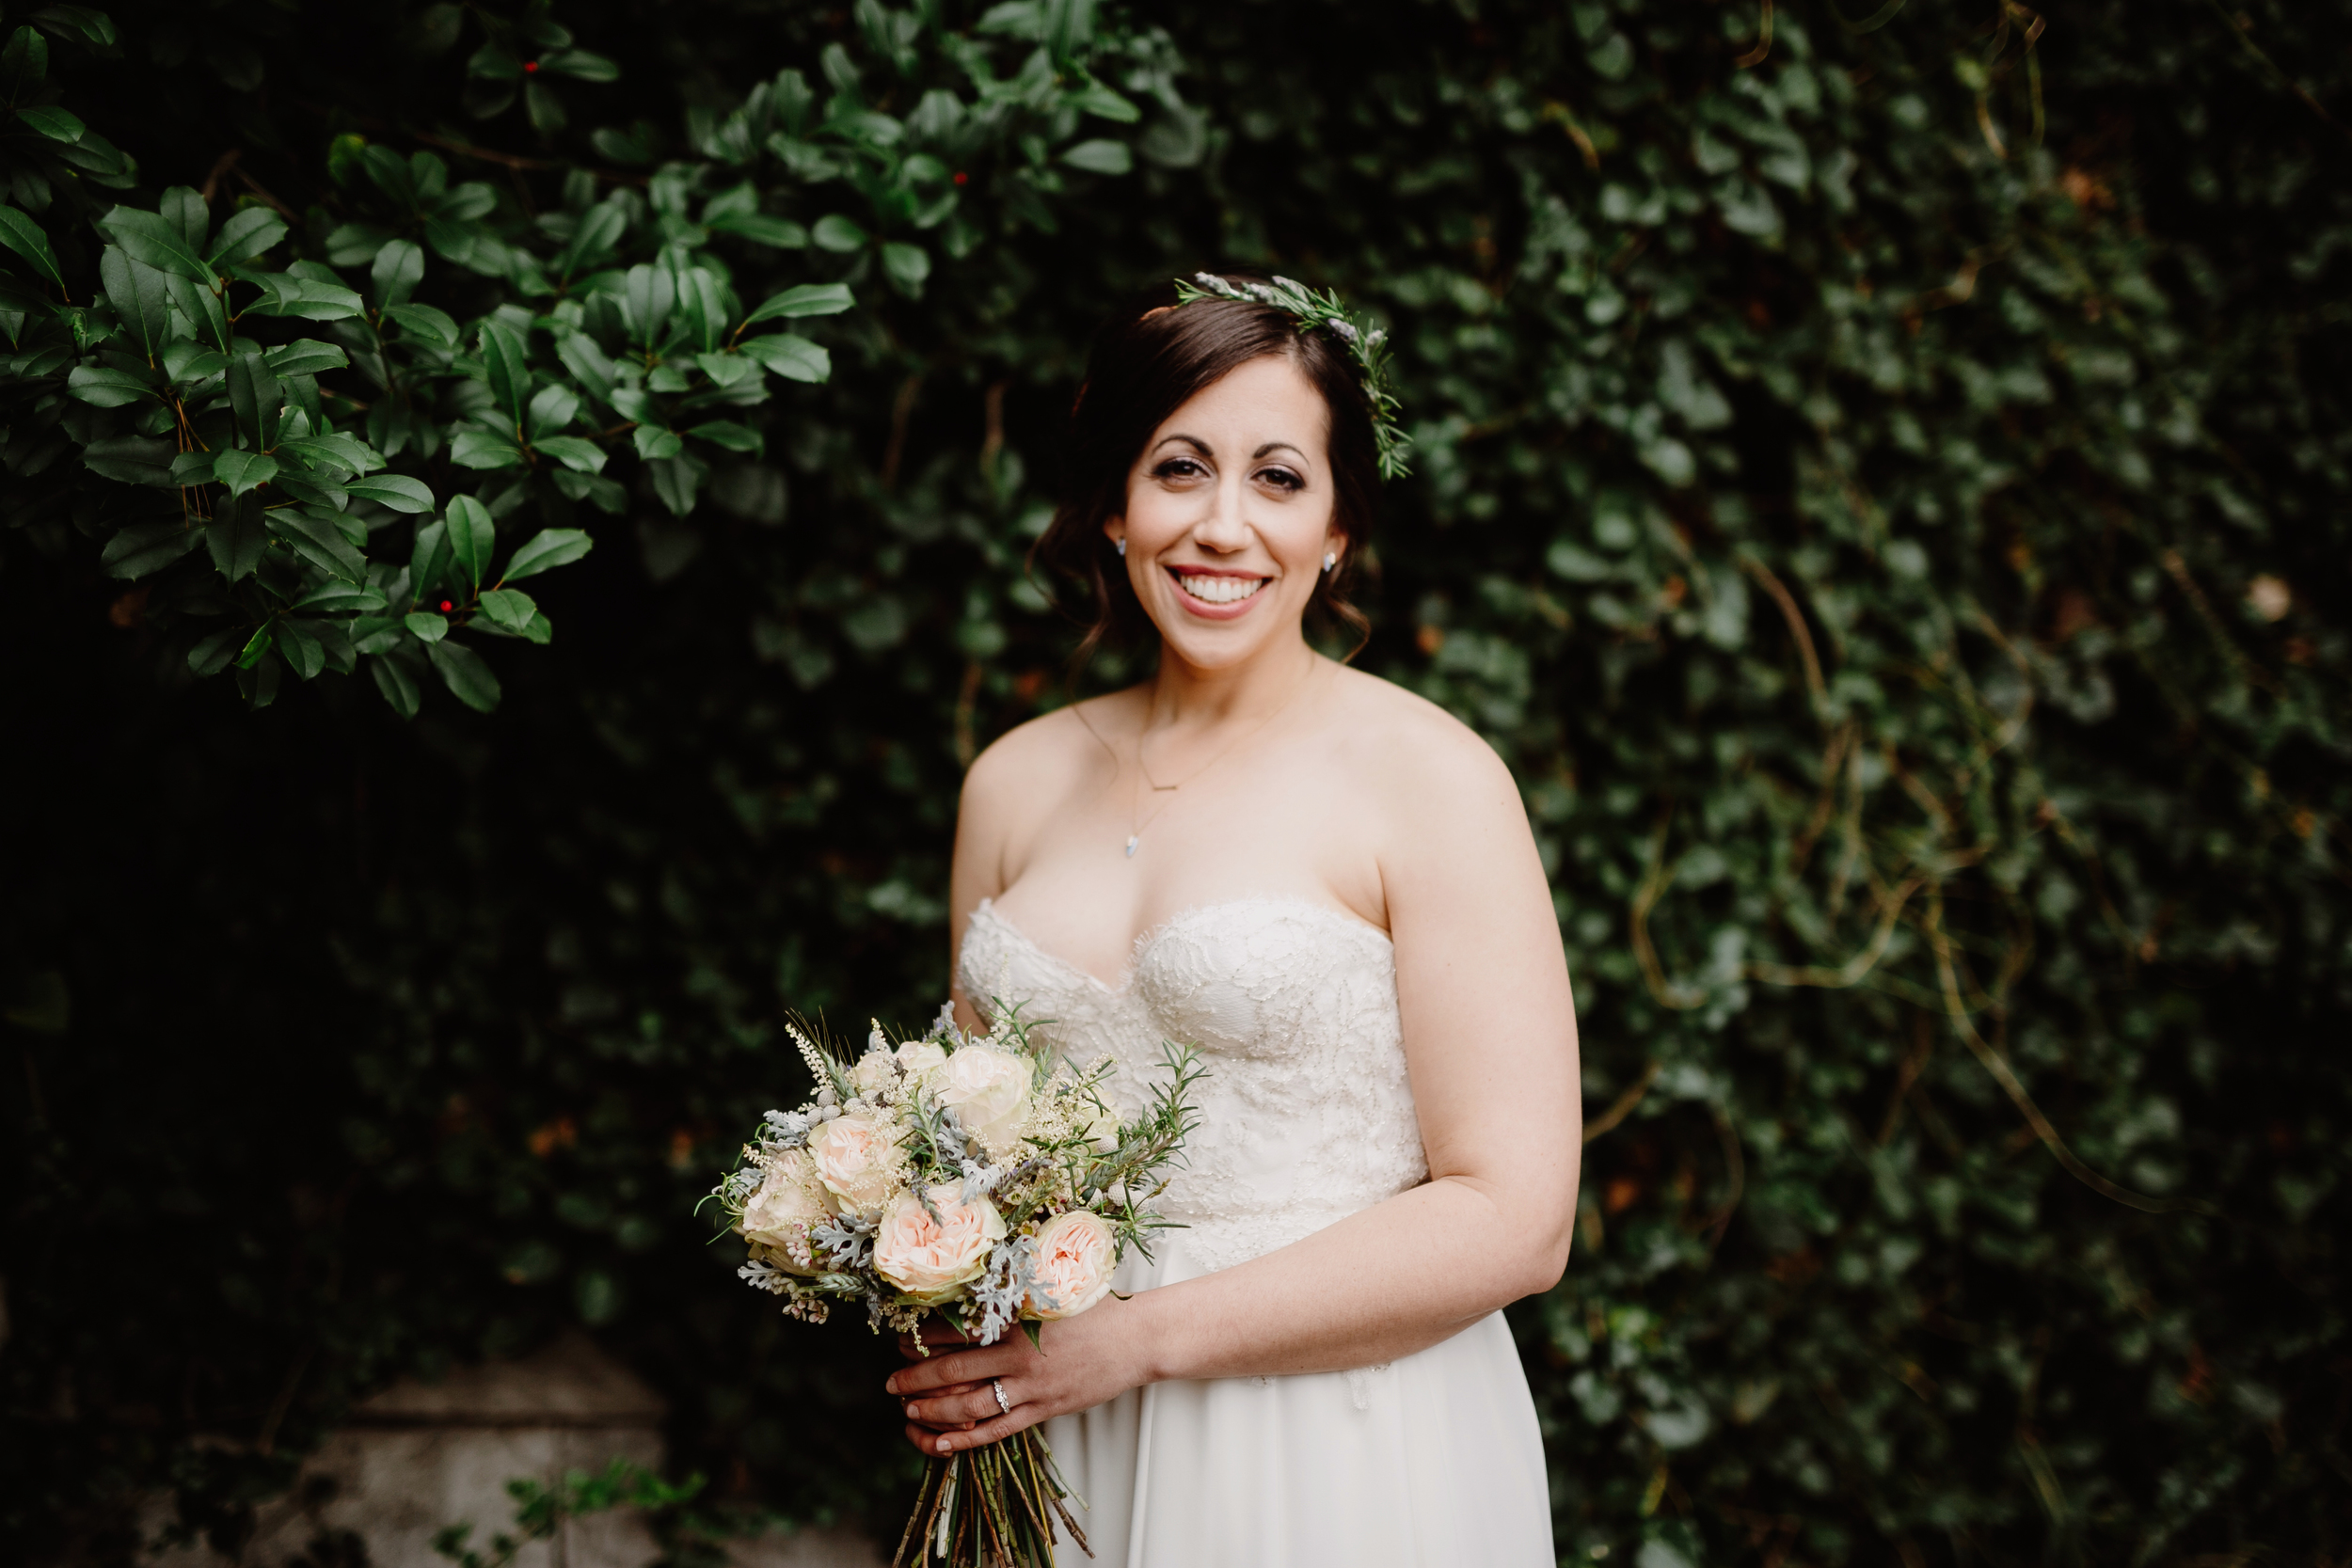 Bridal flowers with herbs and garden roses // Nashville Wedding Florist